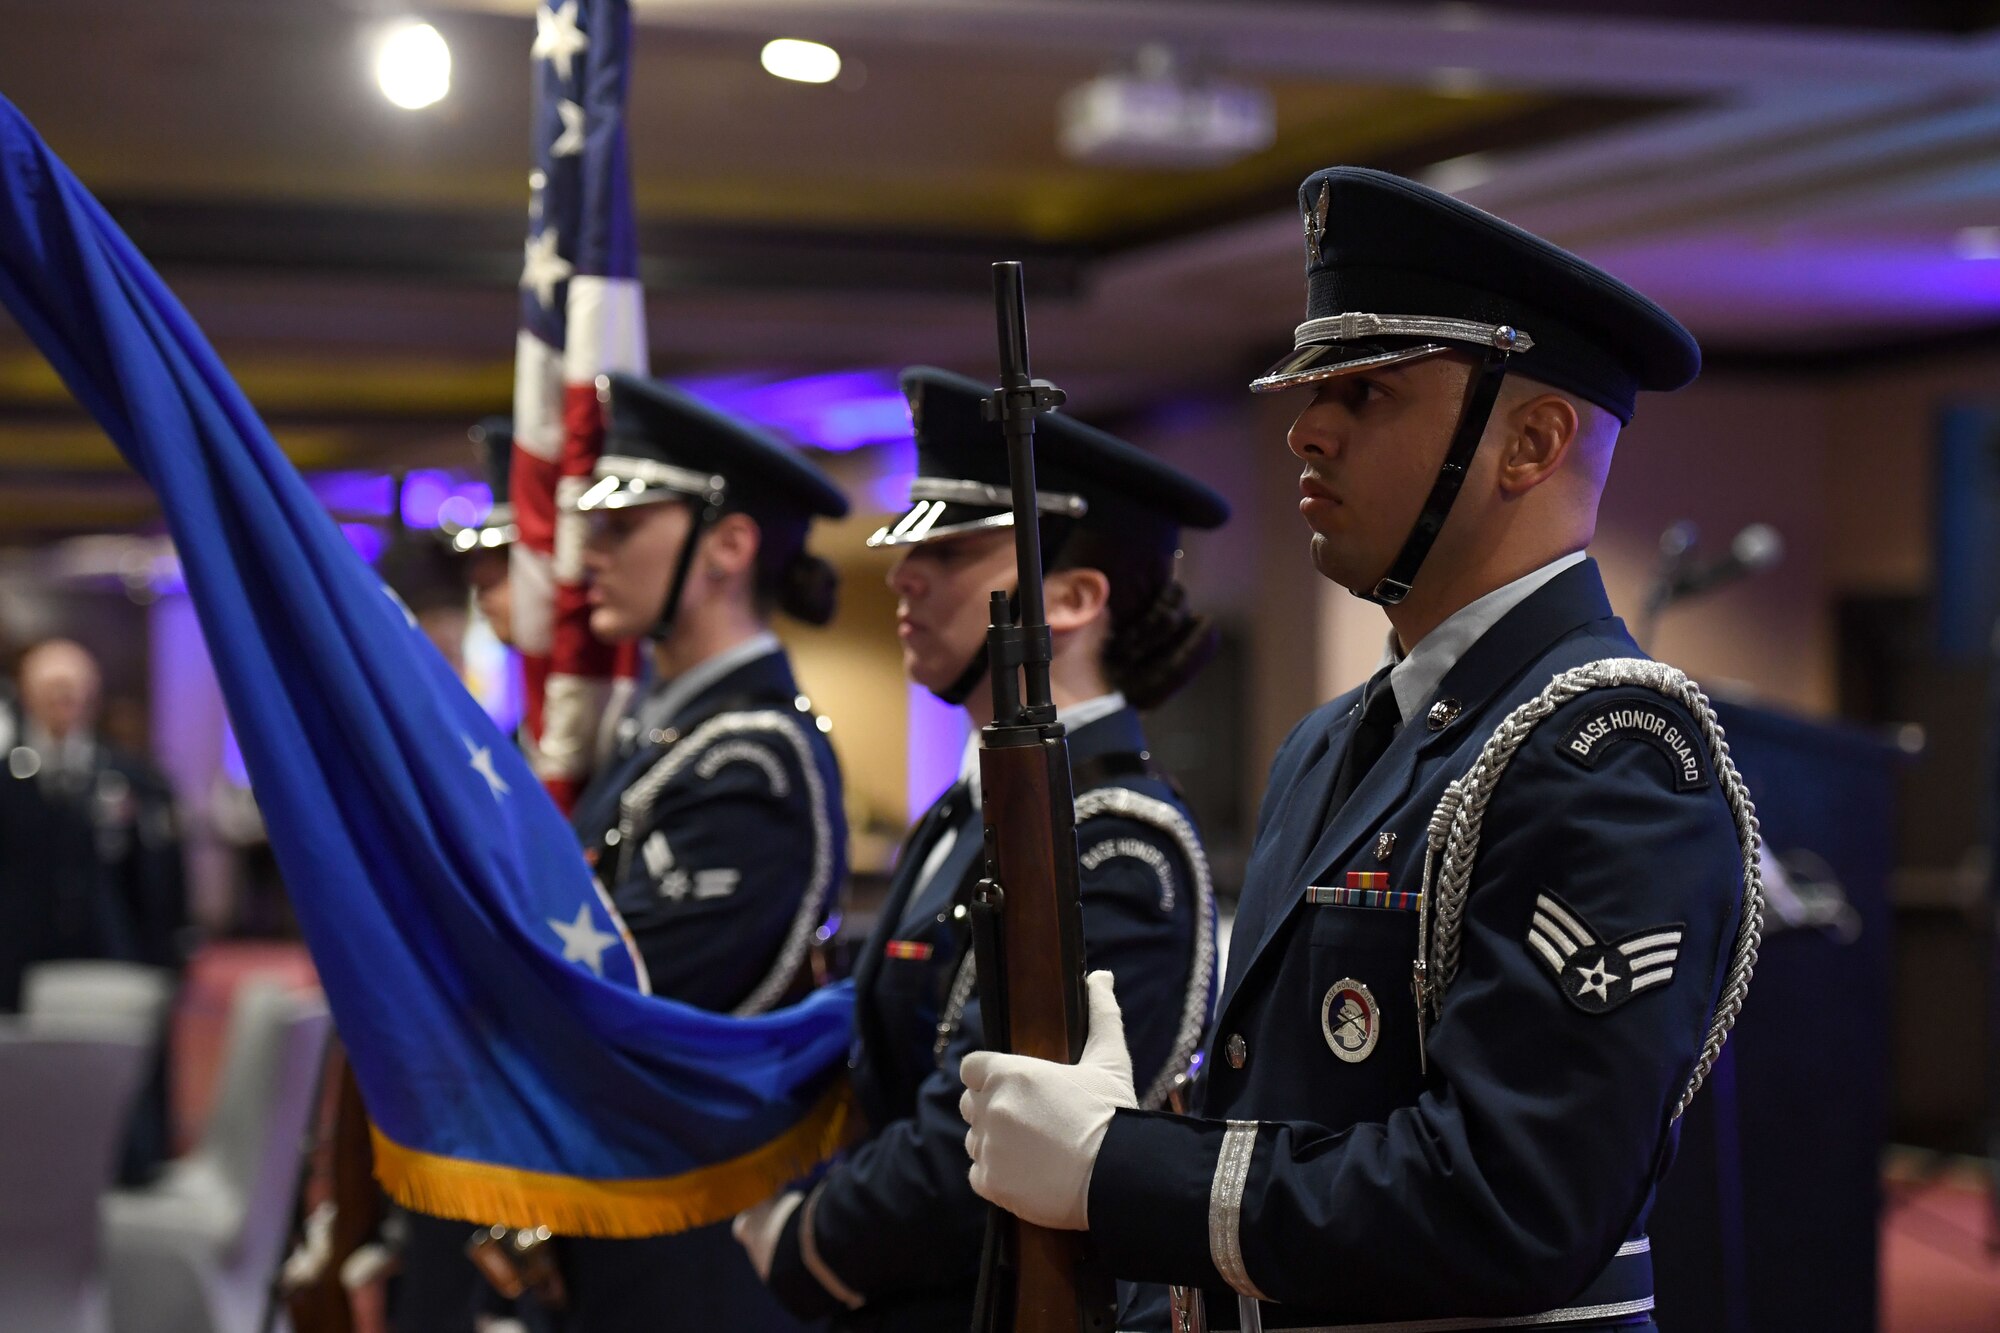 Members of the Keesler Air Force Base Honor Guard present the colors during the Keesler Air Force Ball inside the IP Casino Resort Spa at Biloxi, Mississippi, Sept. 17, 2022. The event, which celebrated the Air Force's 75th birthday, also included a cake cutting ceremony. (U.S. Air Force photo by Kemberly Groue)